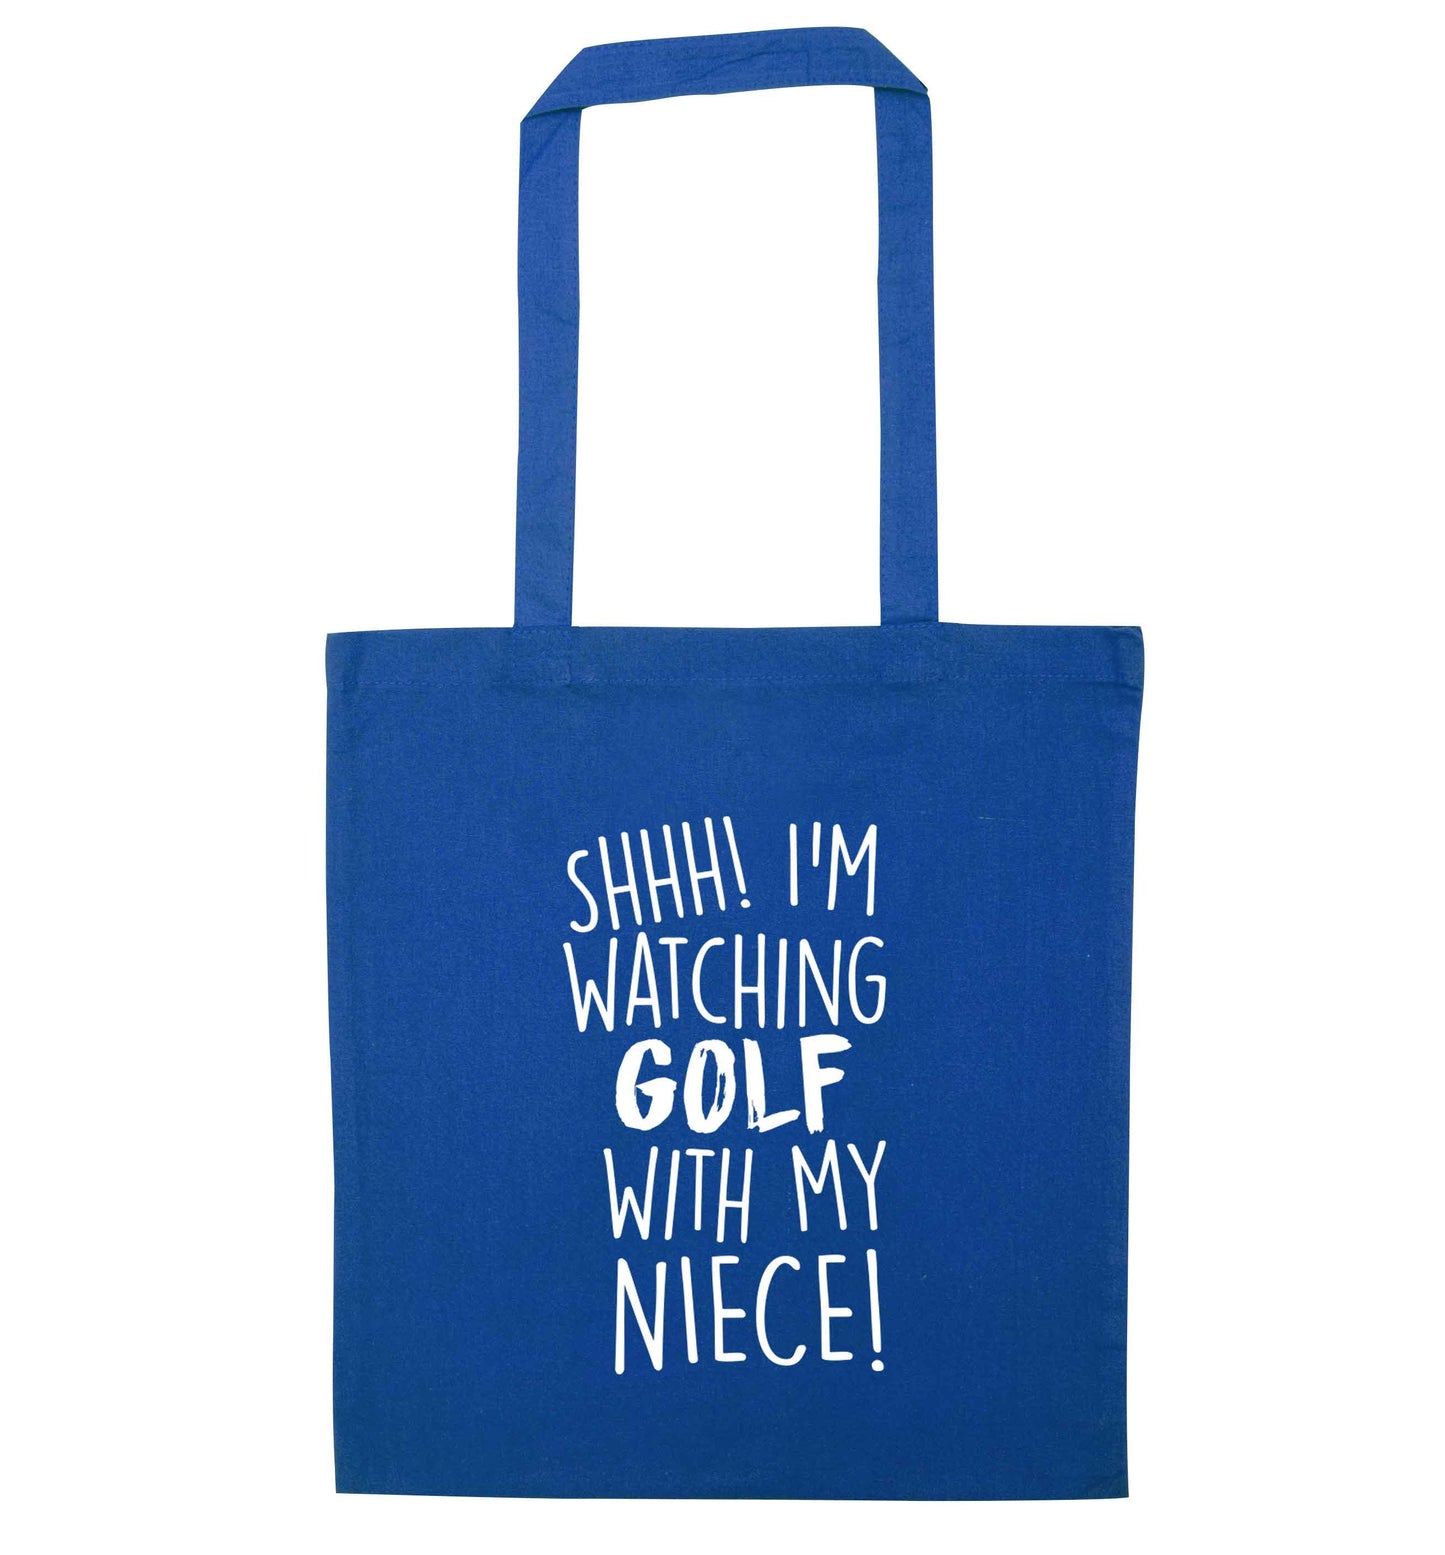 Shh I'm watching golf with my niece blue tote bag